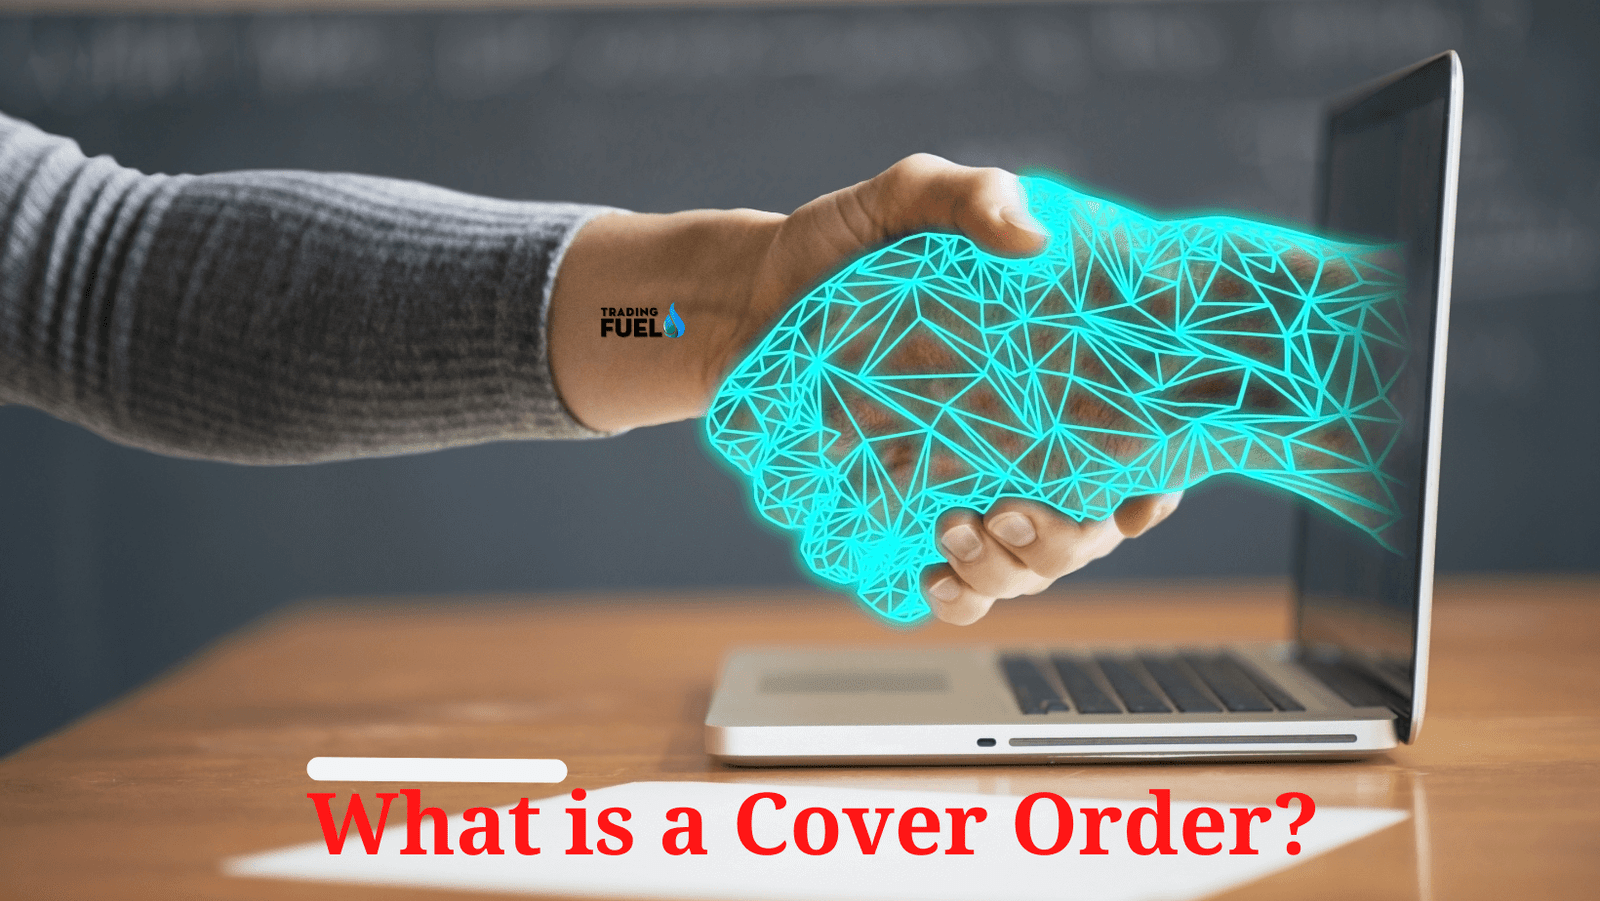 What is a Cover Order?